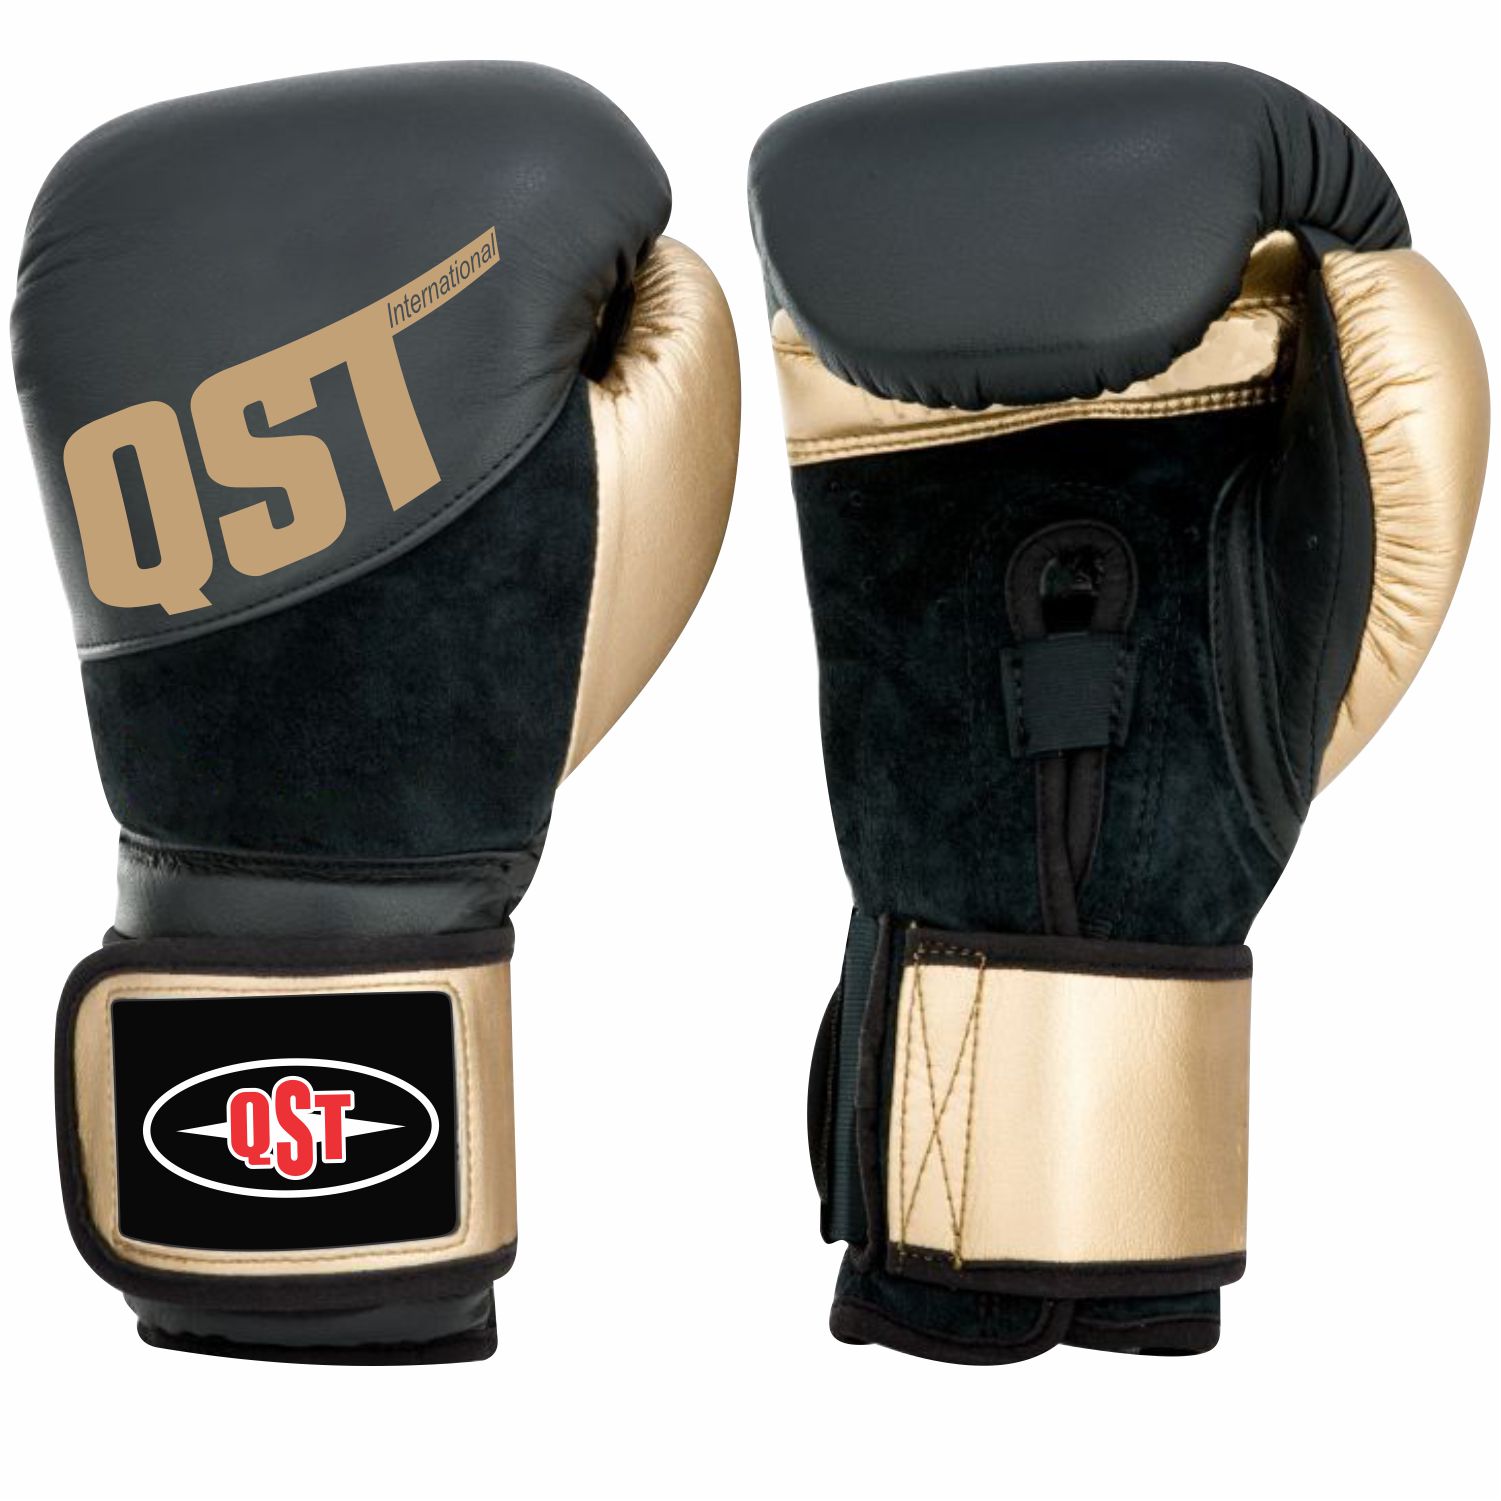 Professional Boxing Gloves - PRG-1521